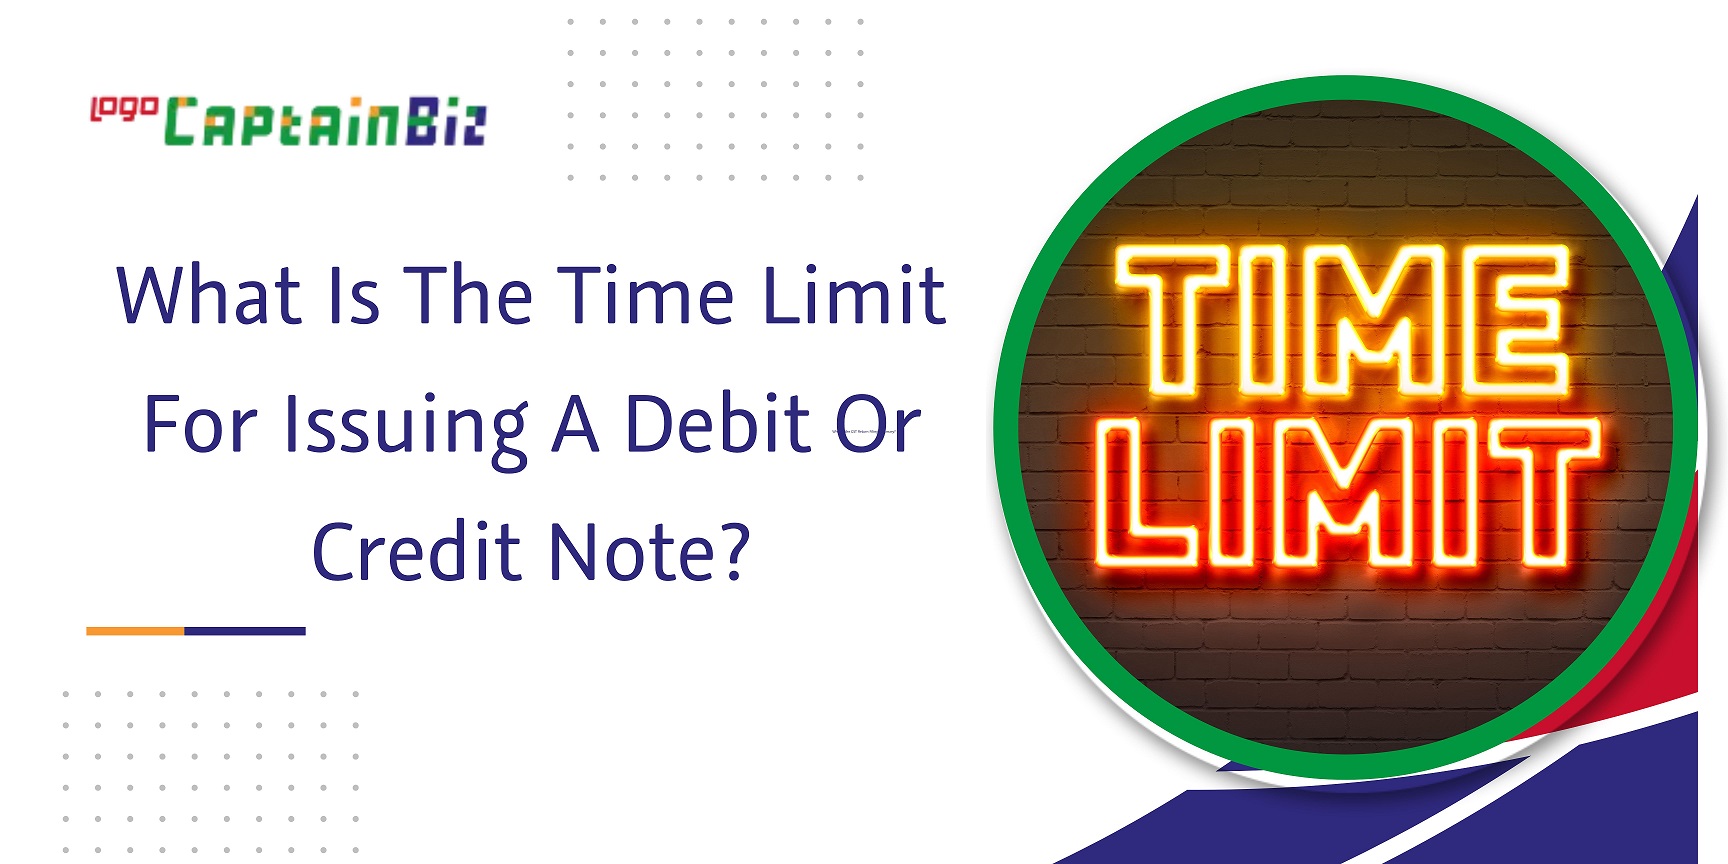 captainbiz what is the time limit for issuing a debit or credit note